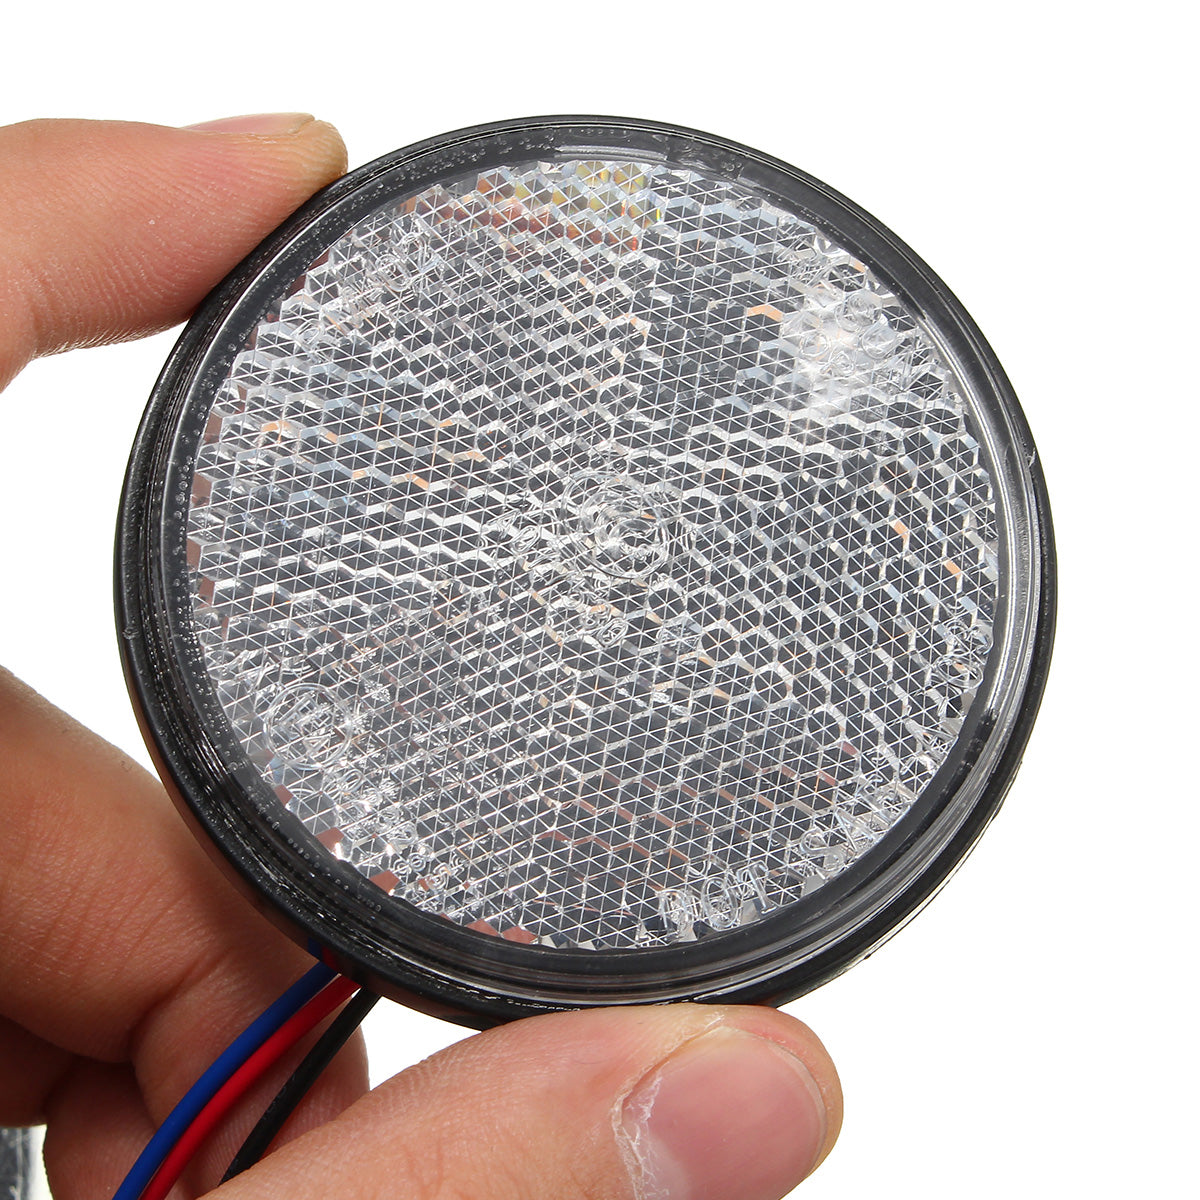 Snow 6W 24LED  Round Reflector LED Rear Taillight Brake Stop Light For Motorcycle 7 Colors